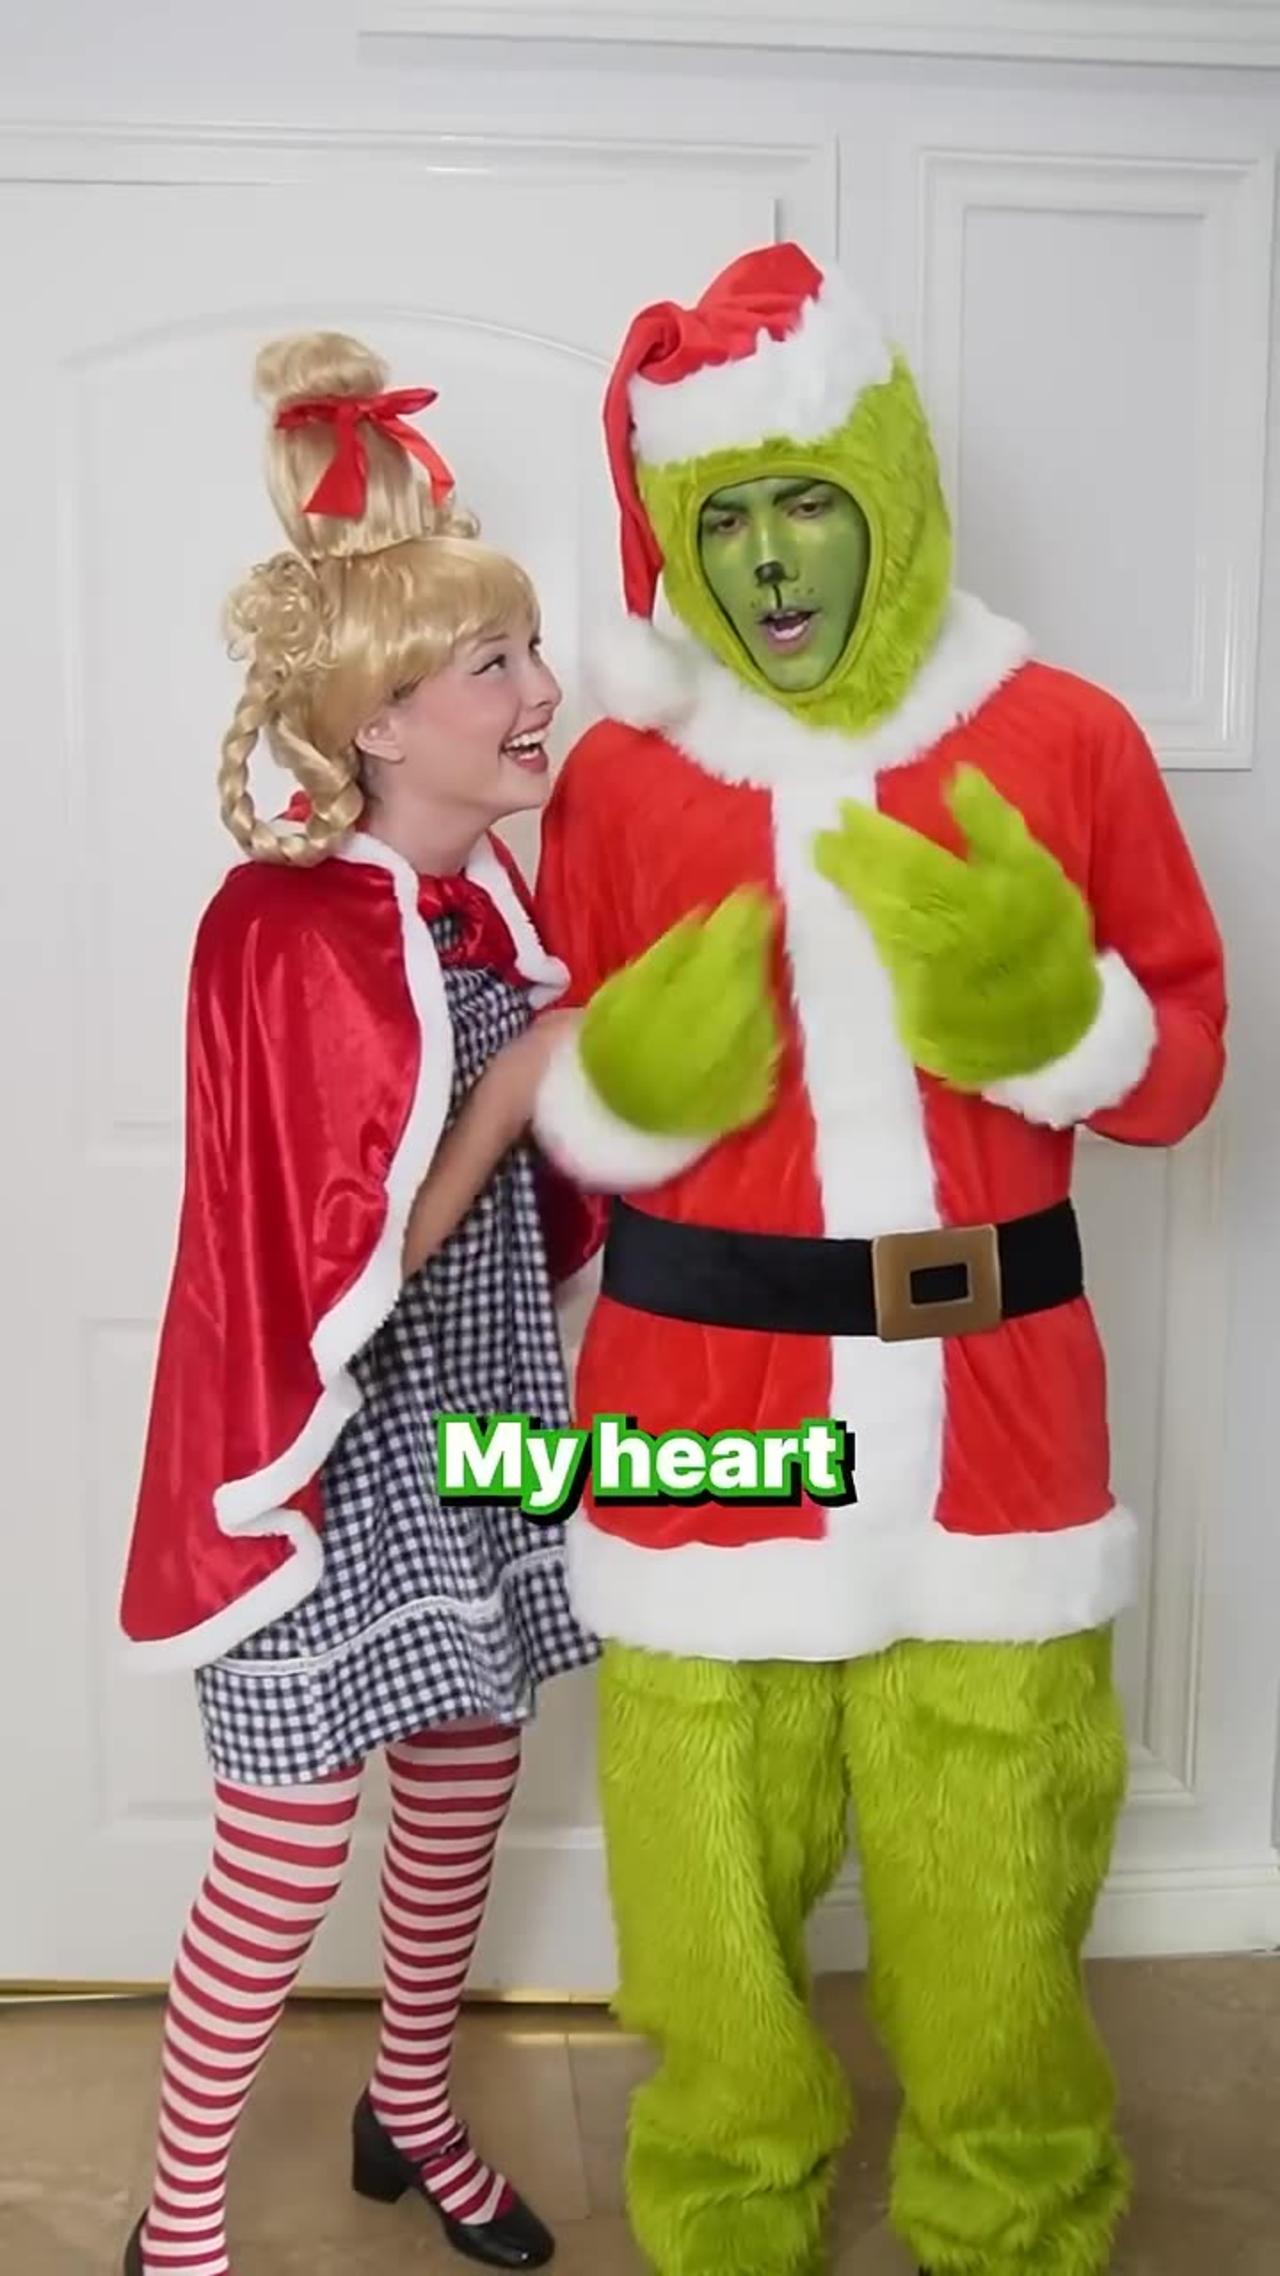 the grinch